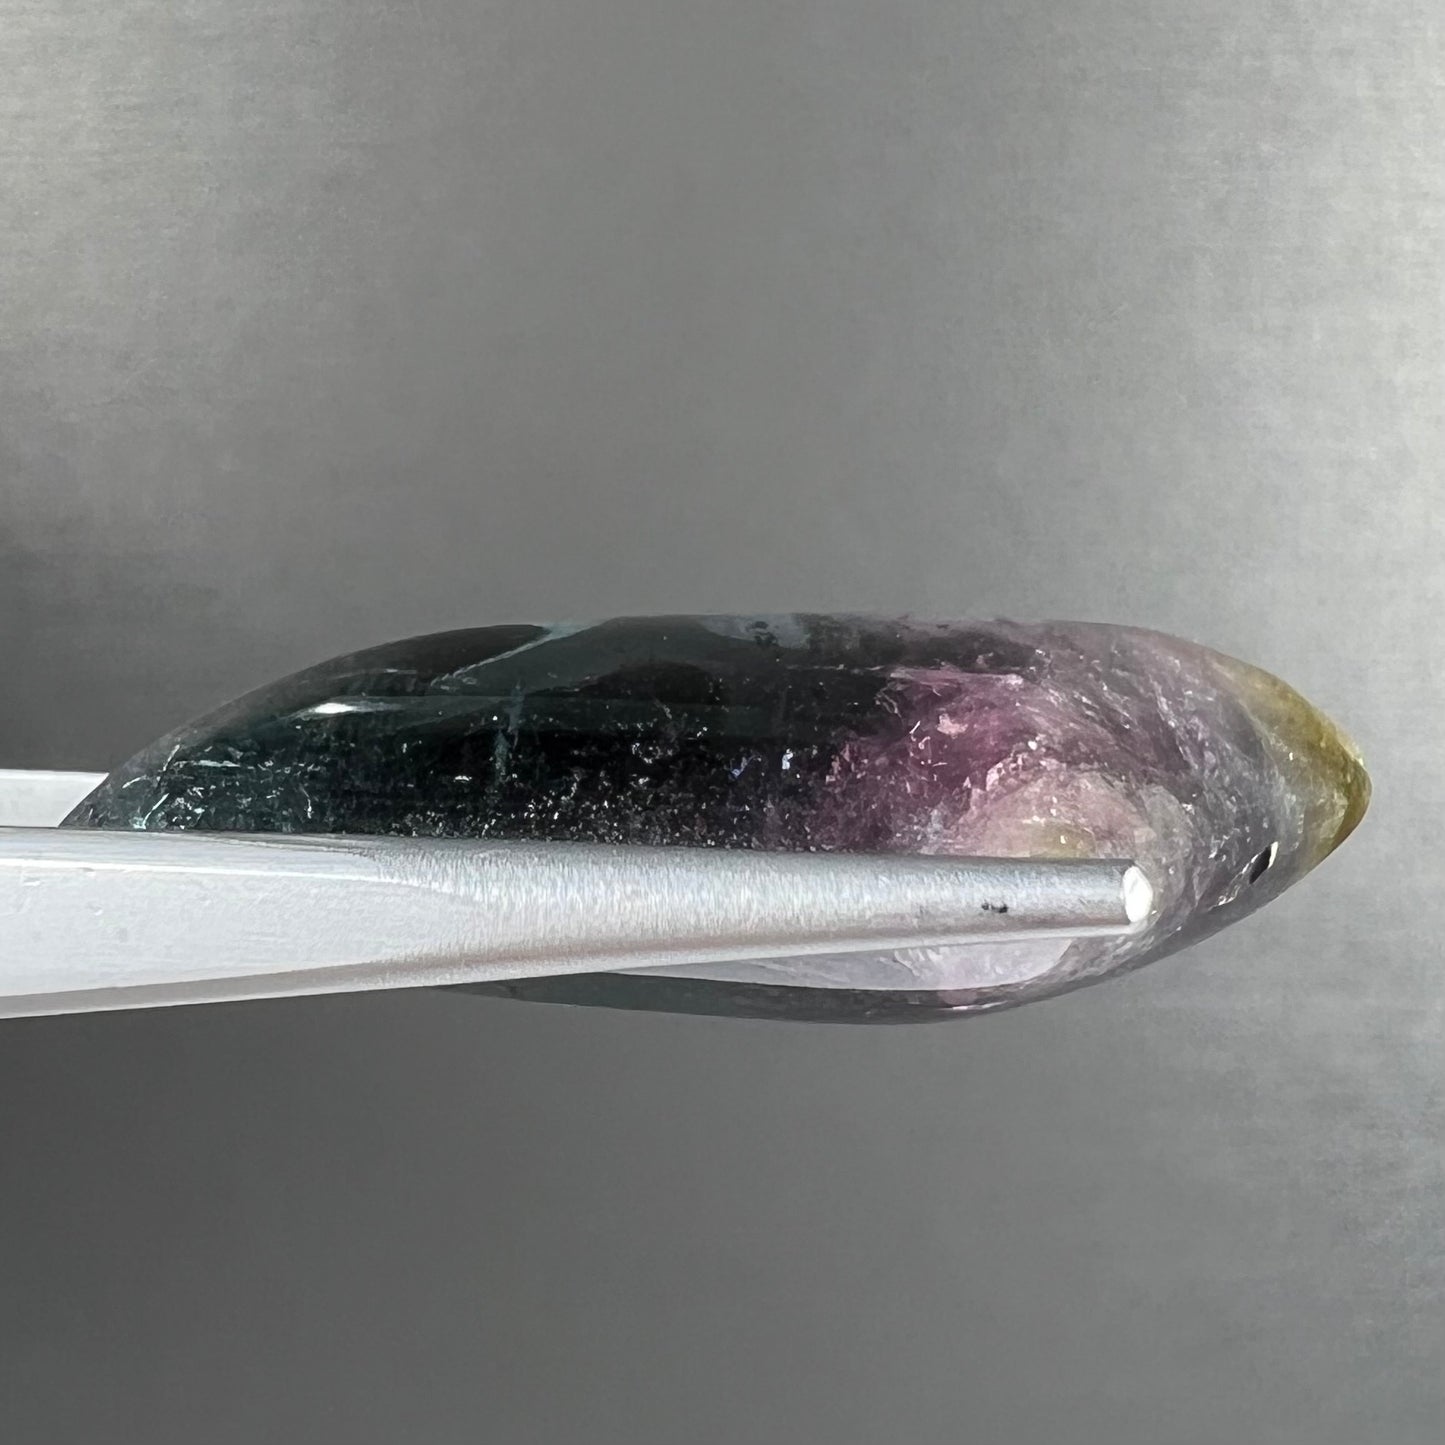 A loose, freeform cabochon cut tricolor tourmaline stone that has blue, pink, and yellow colors.